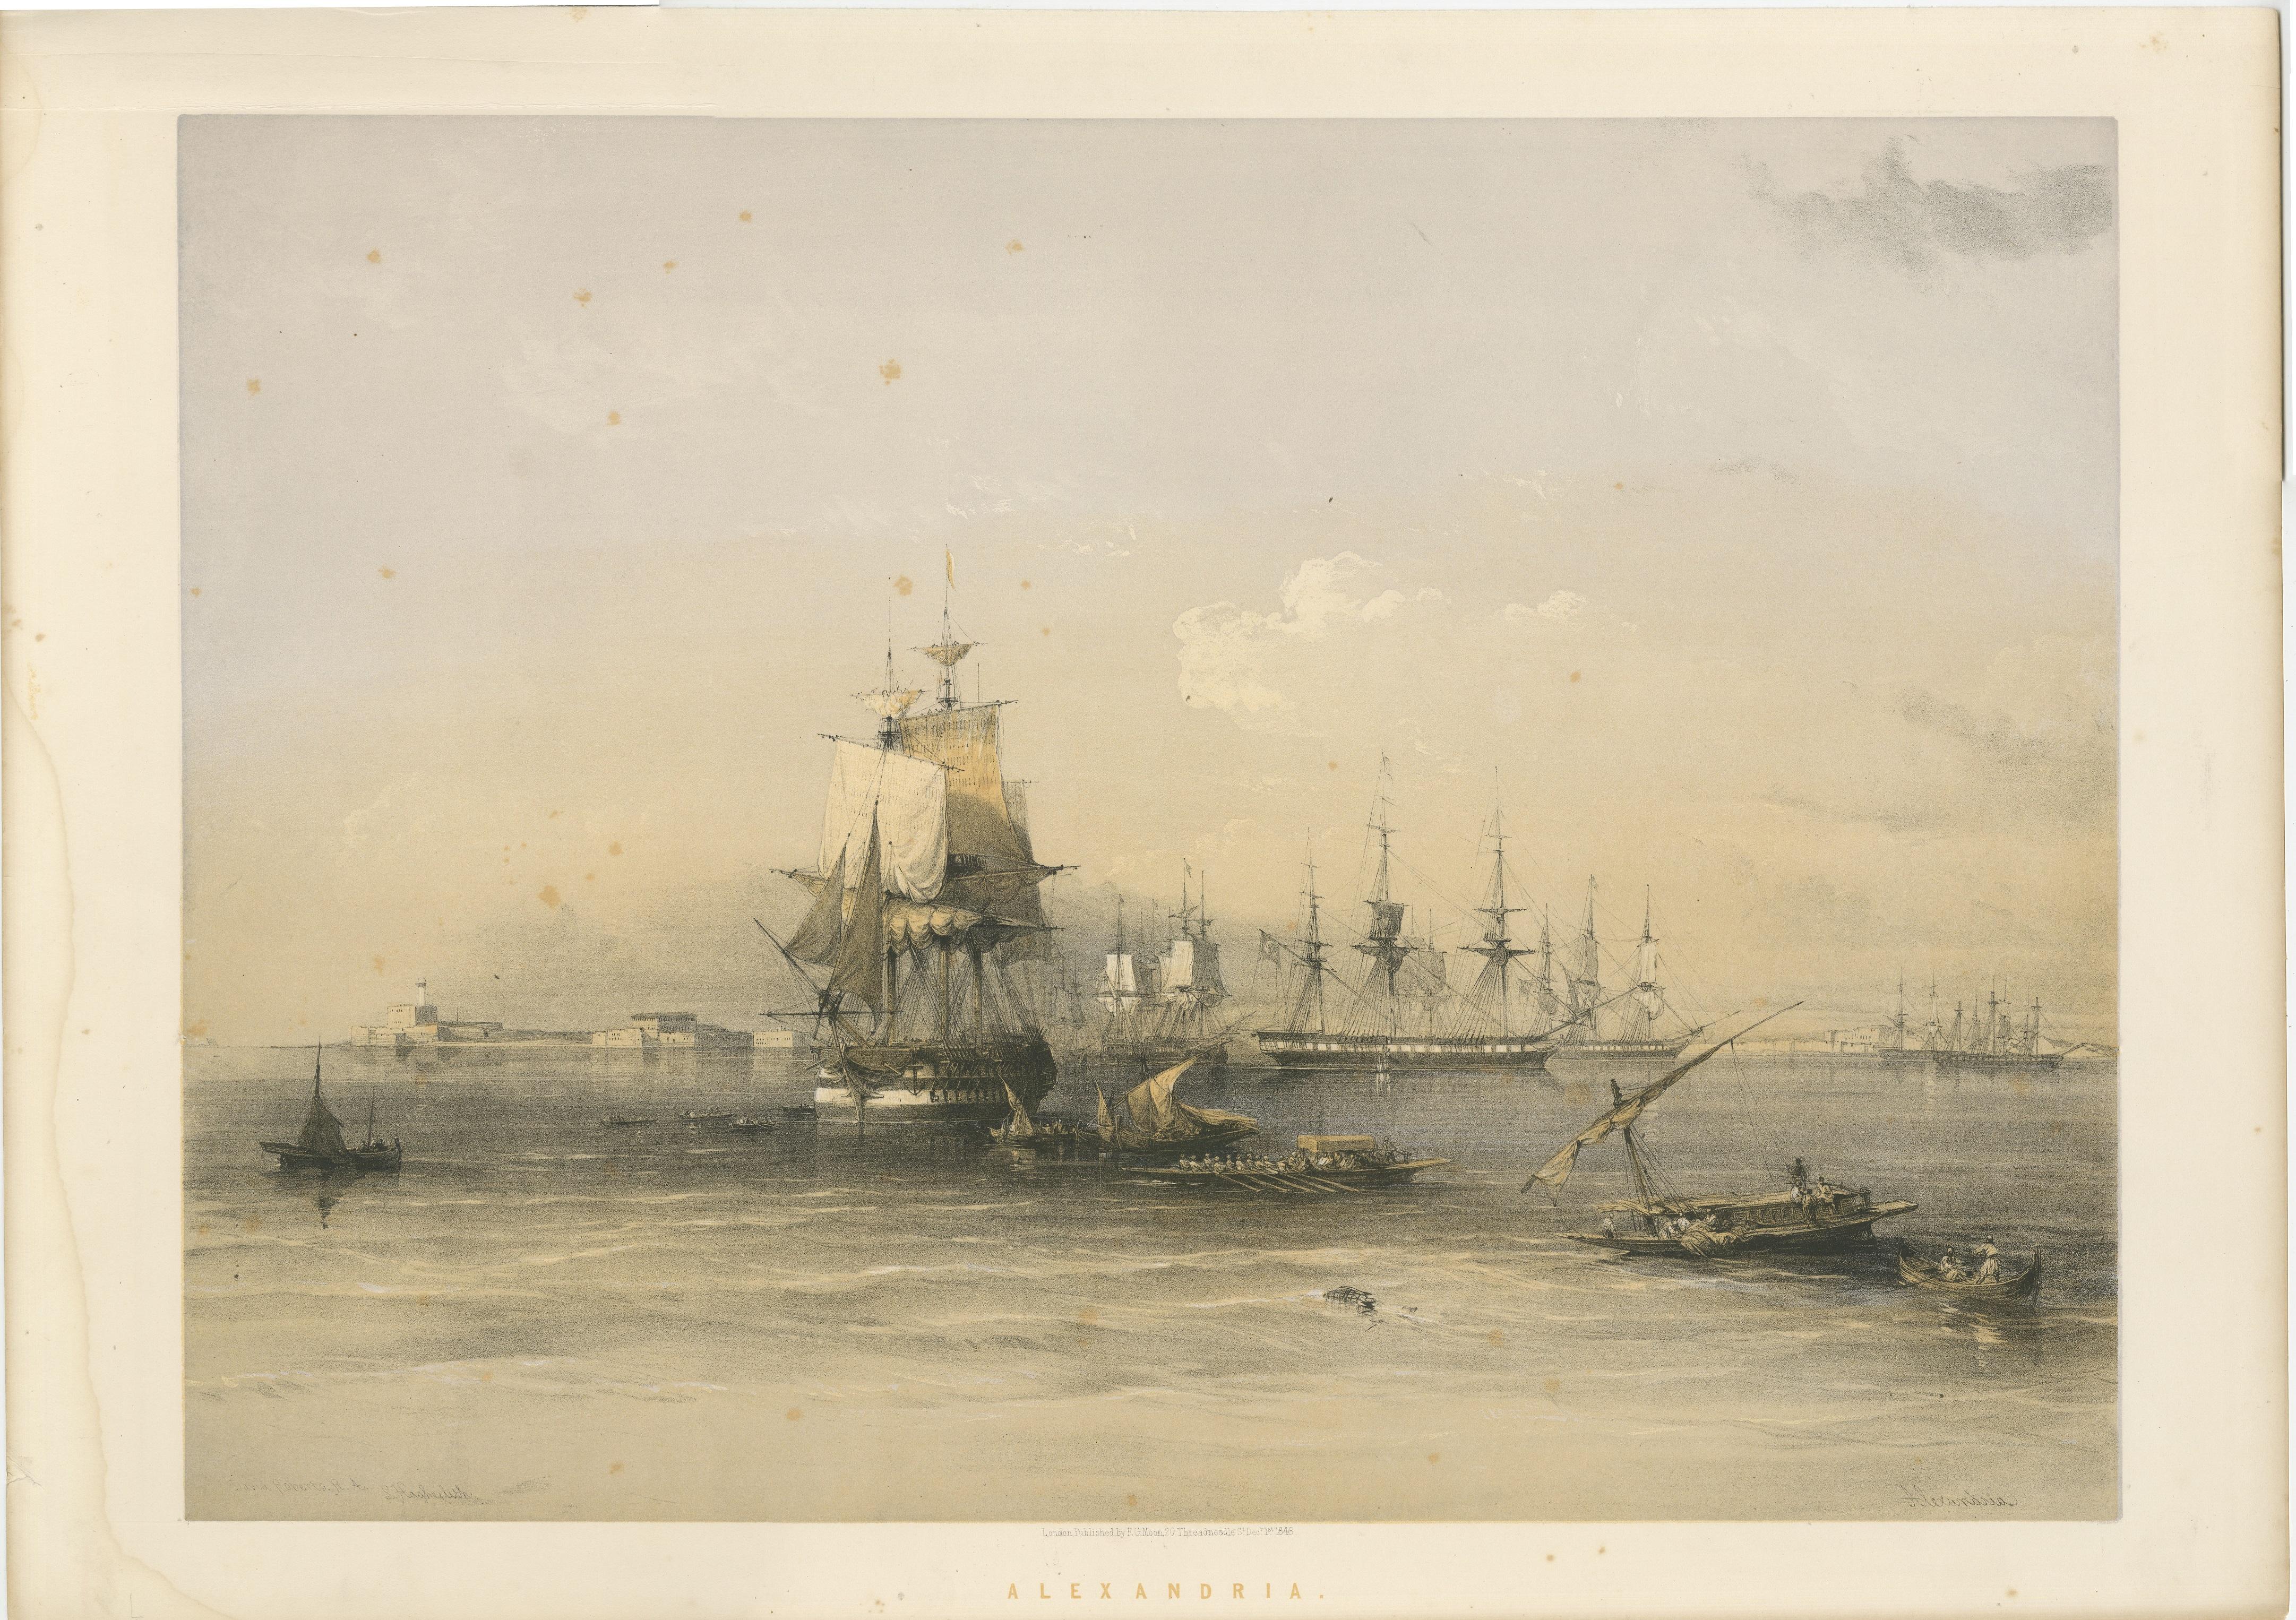 Antique print titled 'Alexandria'. Tinted lithograph of Alexandria, Egypt, with many ships. This print originates from 'The Holy Land, Syria, Idumea, Arabia, Egypt & Nubia' by David Roberts. Published 1842-49.

David Roberts (1769-1864), was one of